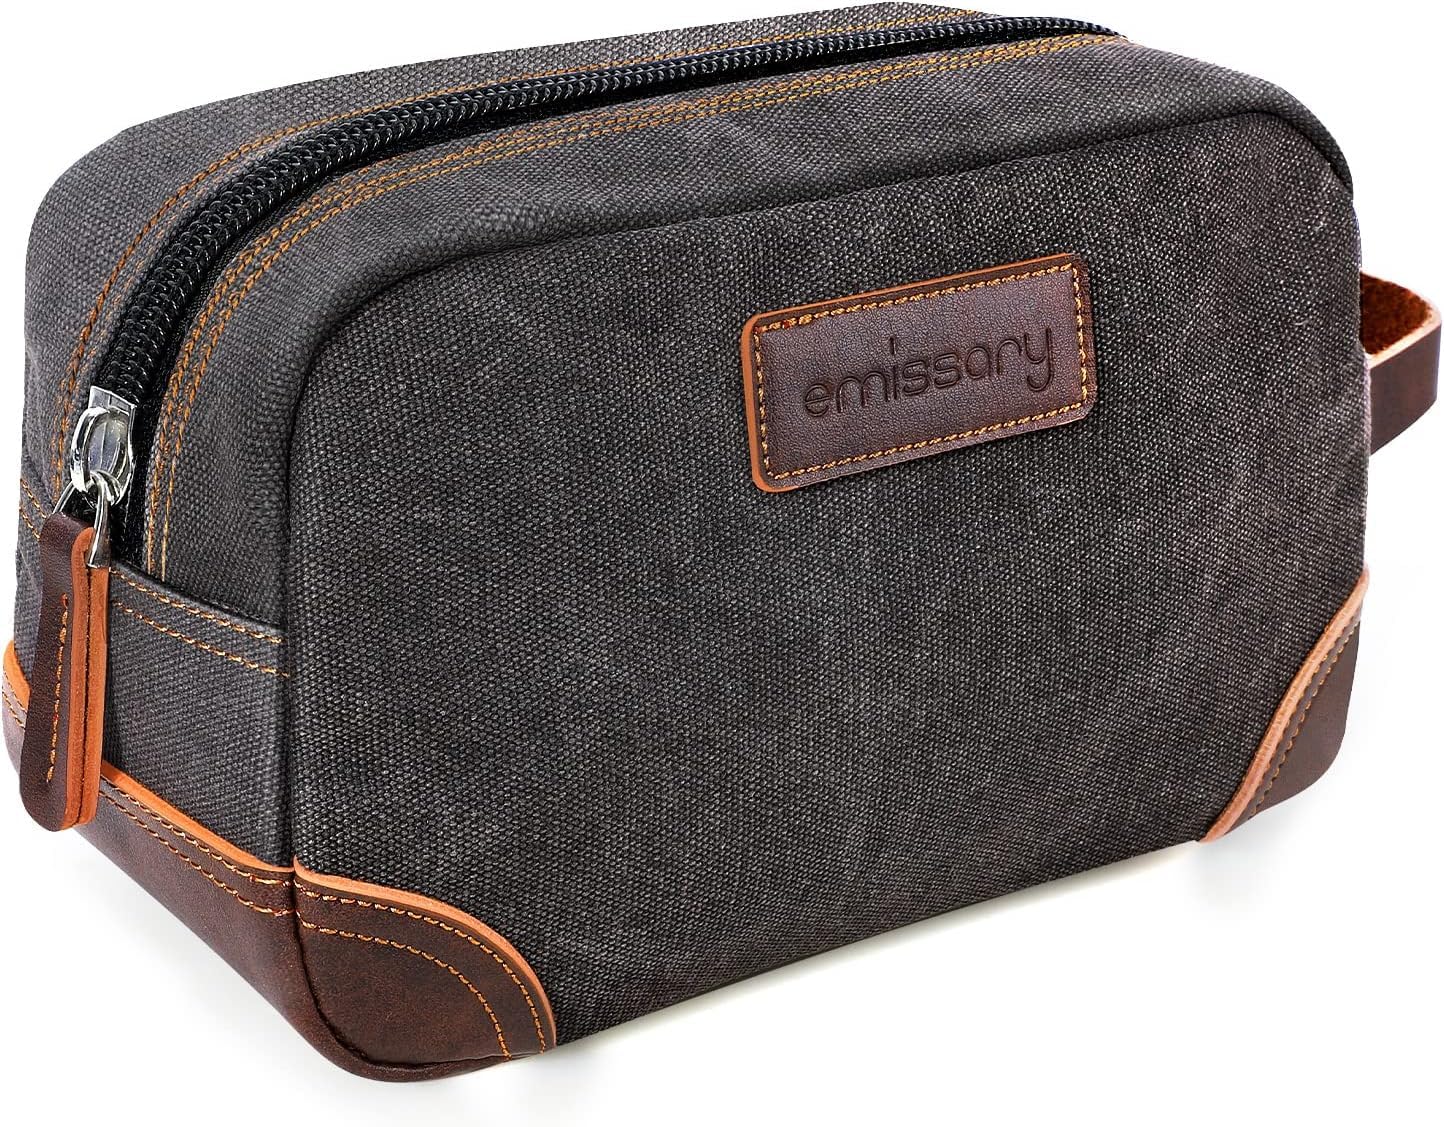 emissary Leather and Canvas Travel Toiletry Bag, Dopp Kit, Bathroom Men's Shaving Kit, Small Travel Accessories (Gray)